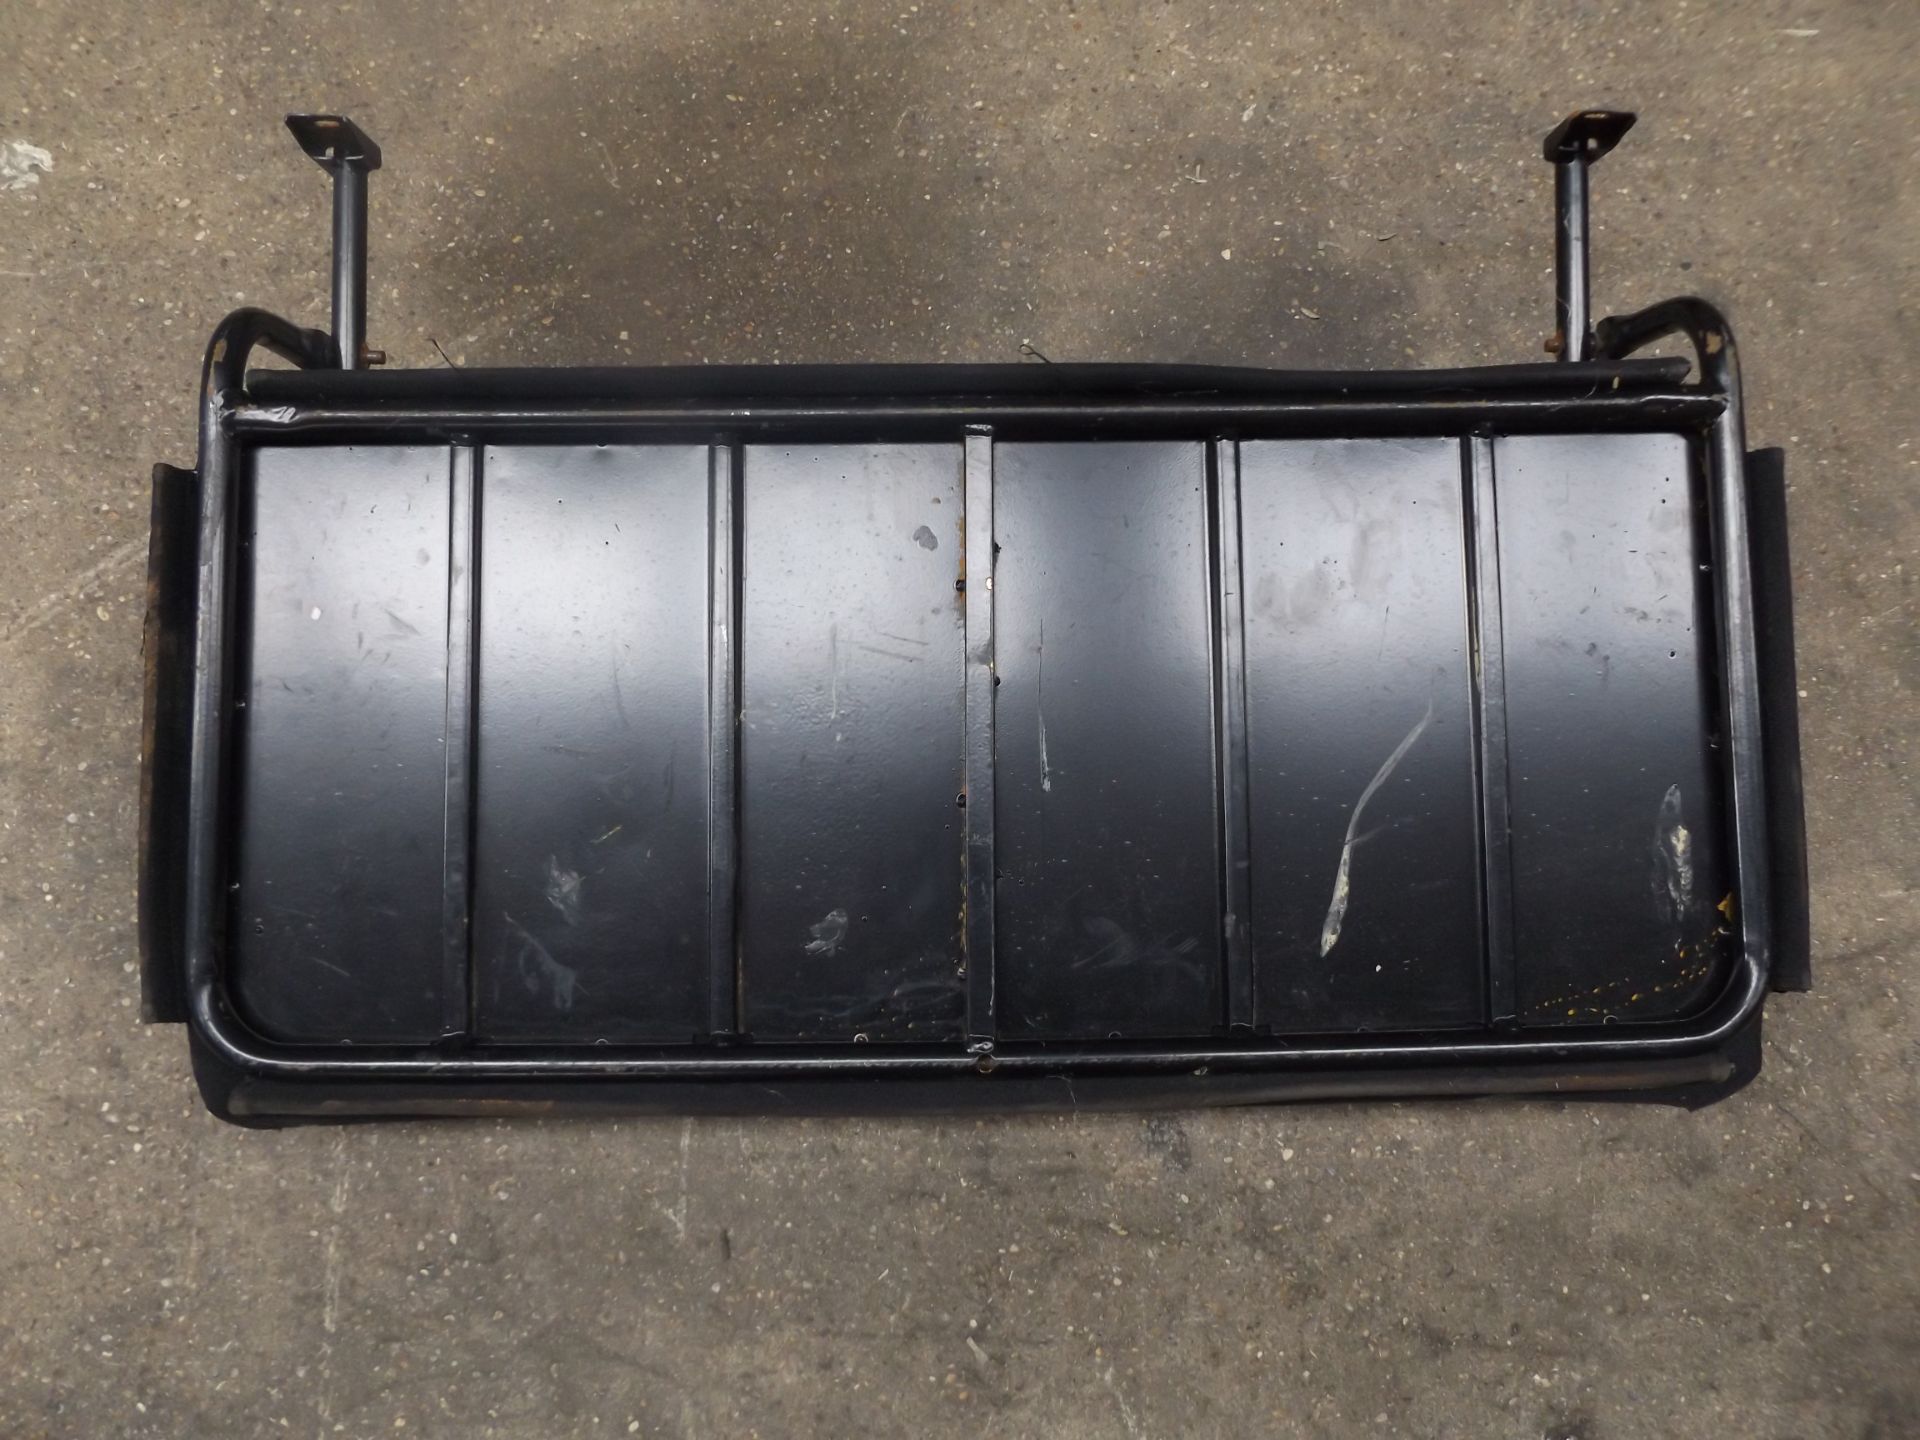 2 x Land Rover Wolf Bench Seats - Image 5 of 9